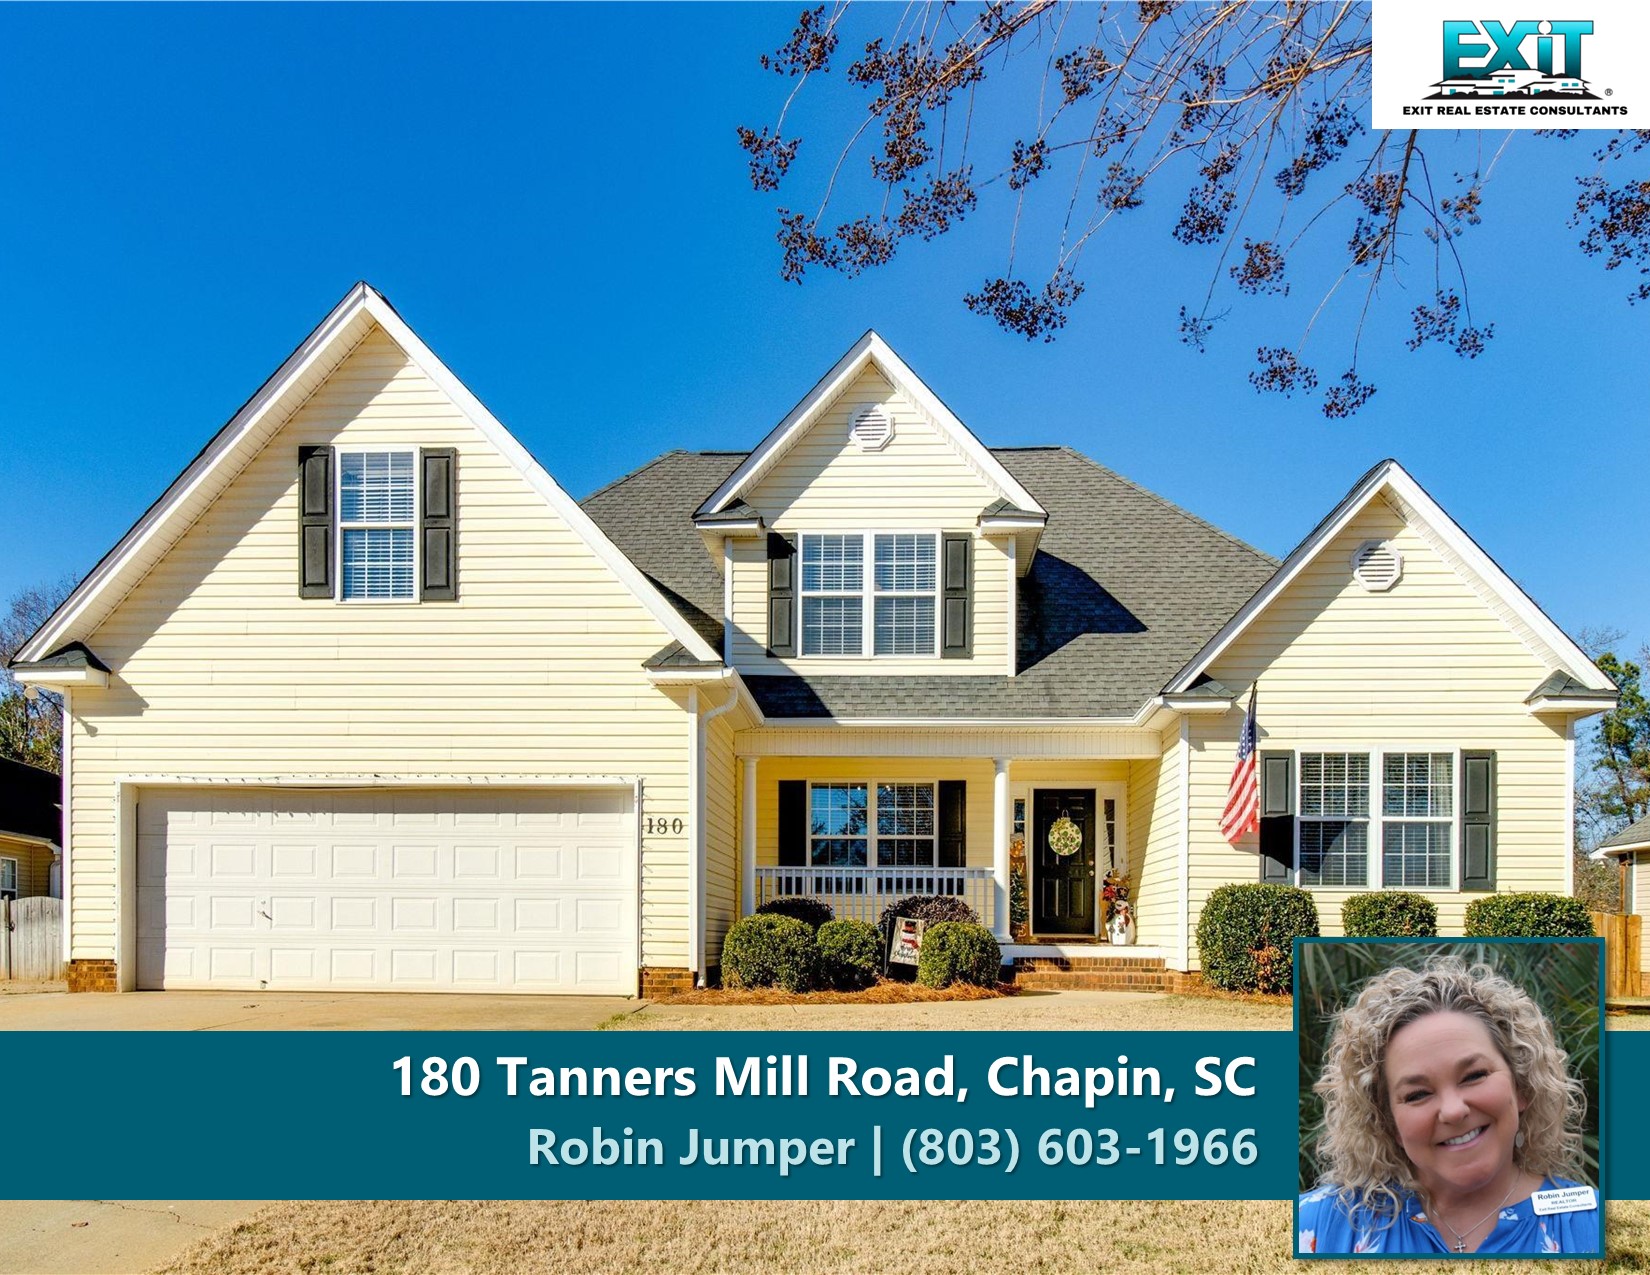 Just listed in Tanners Mill - Chapin